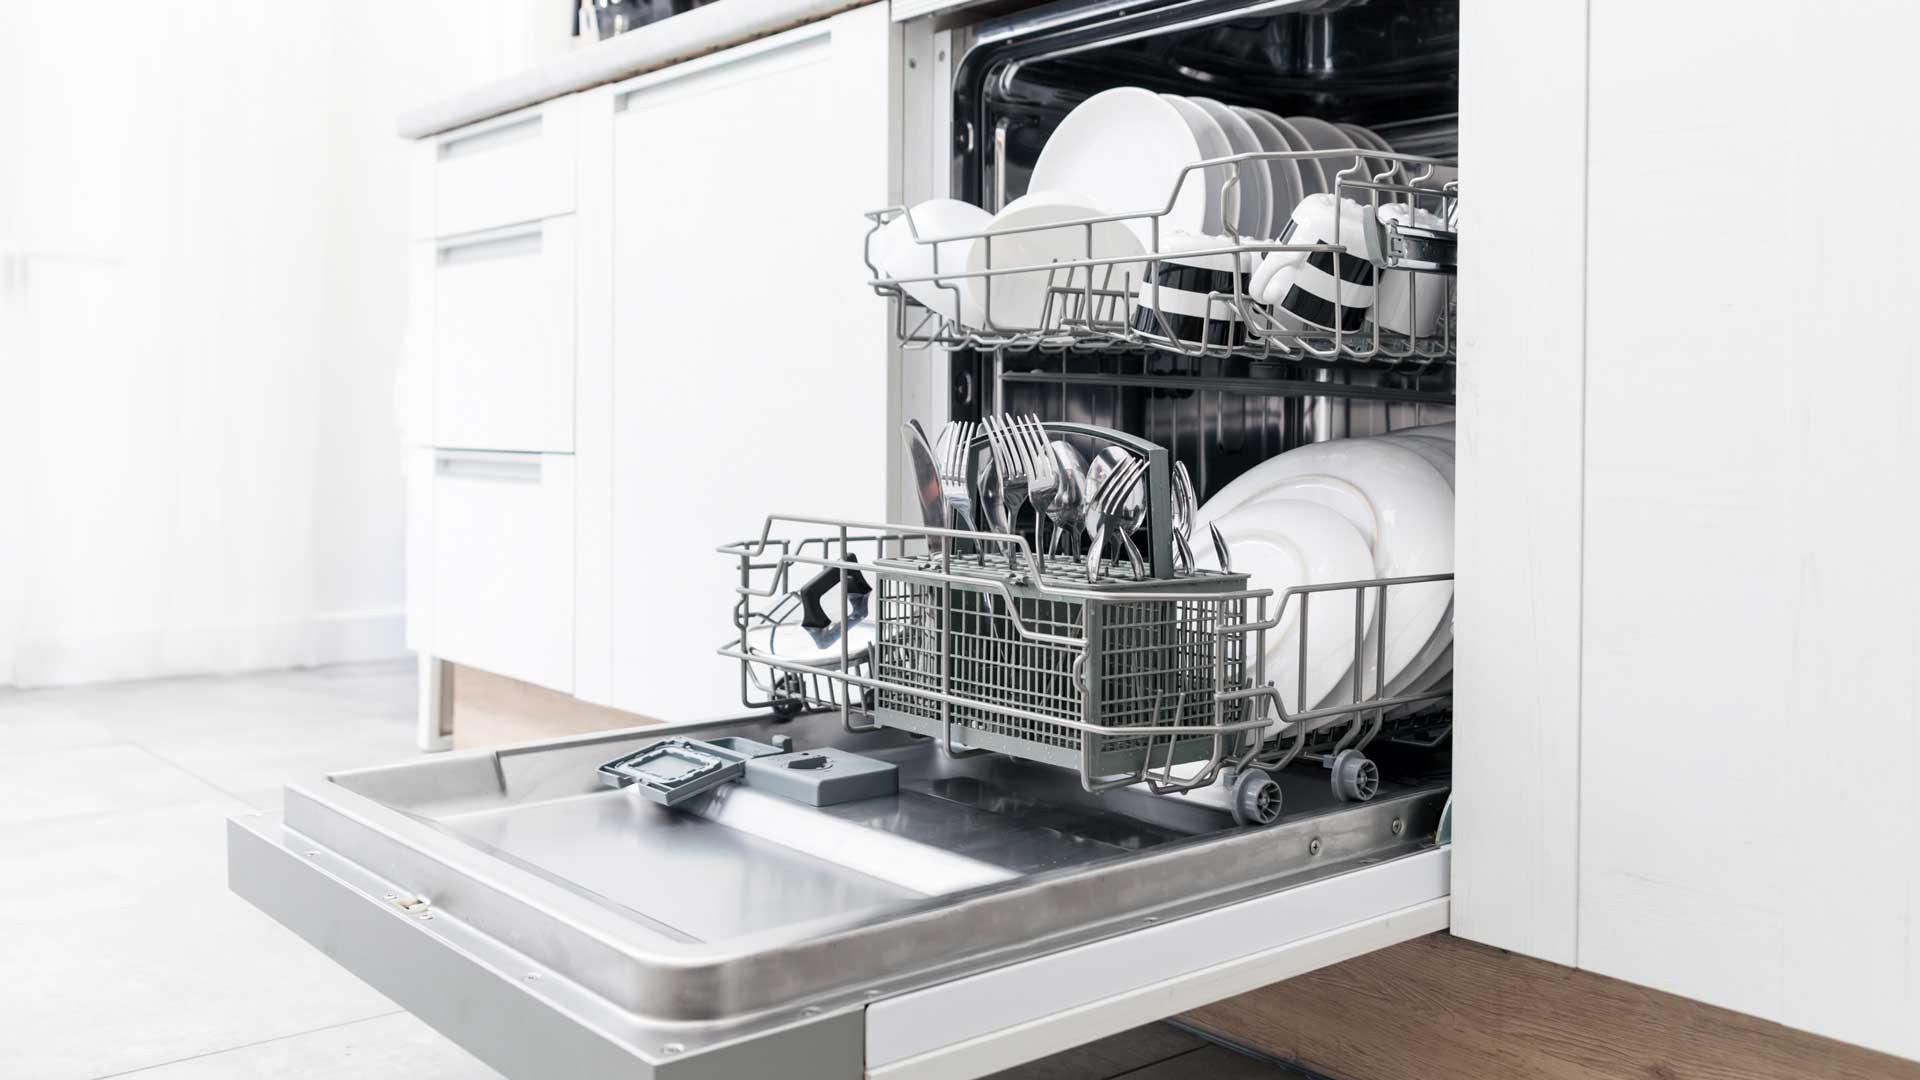 Brightly lit dishwasher full of clean dishes